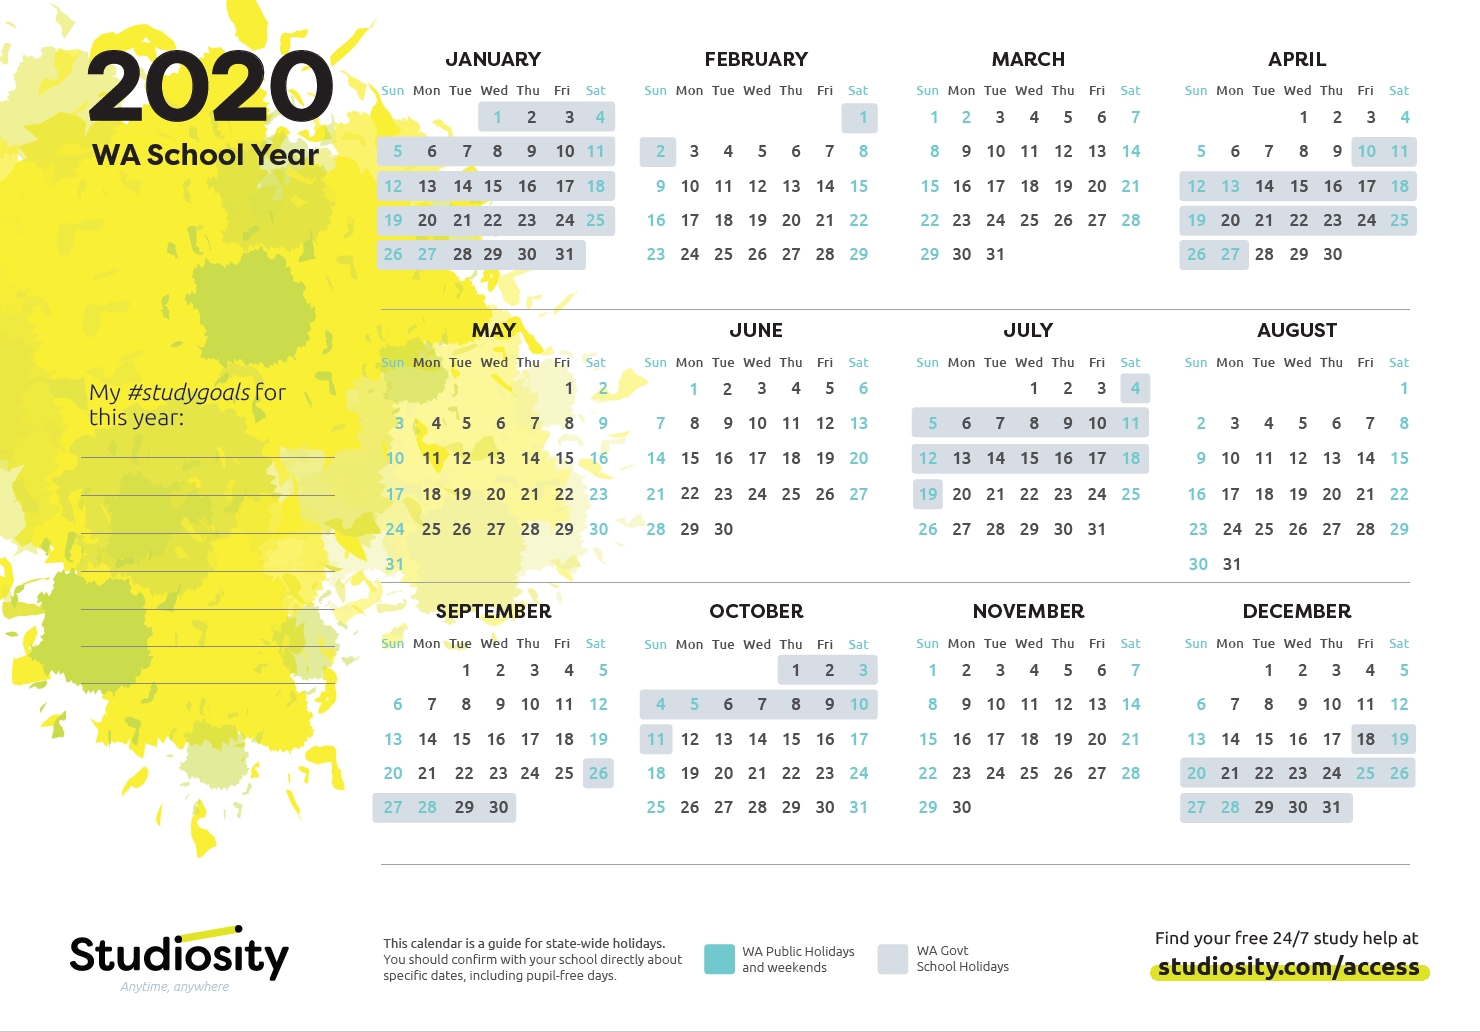 School Terms And Public Holiday Dates For Wa In 2020 Perky 2020 Calendar With School Holidays Printable